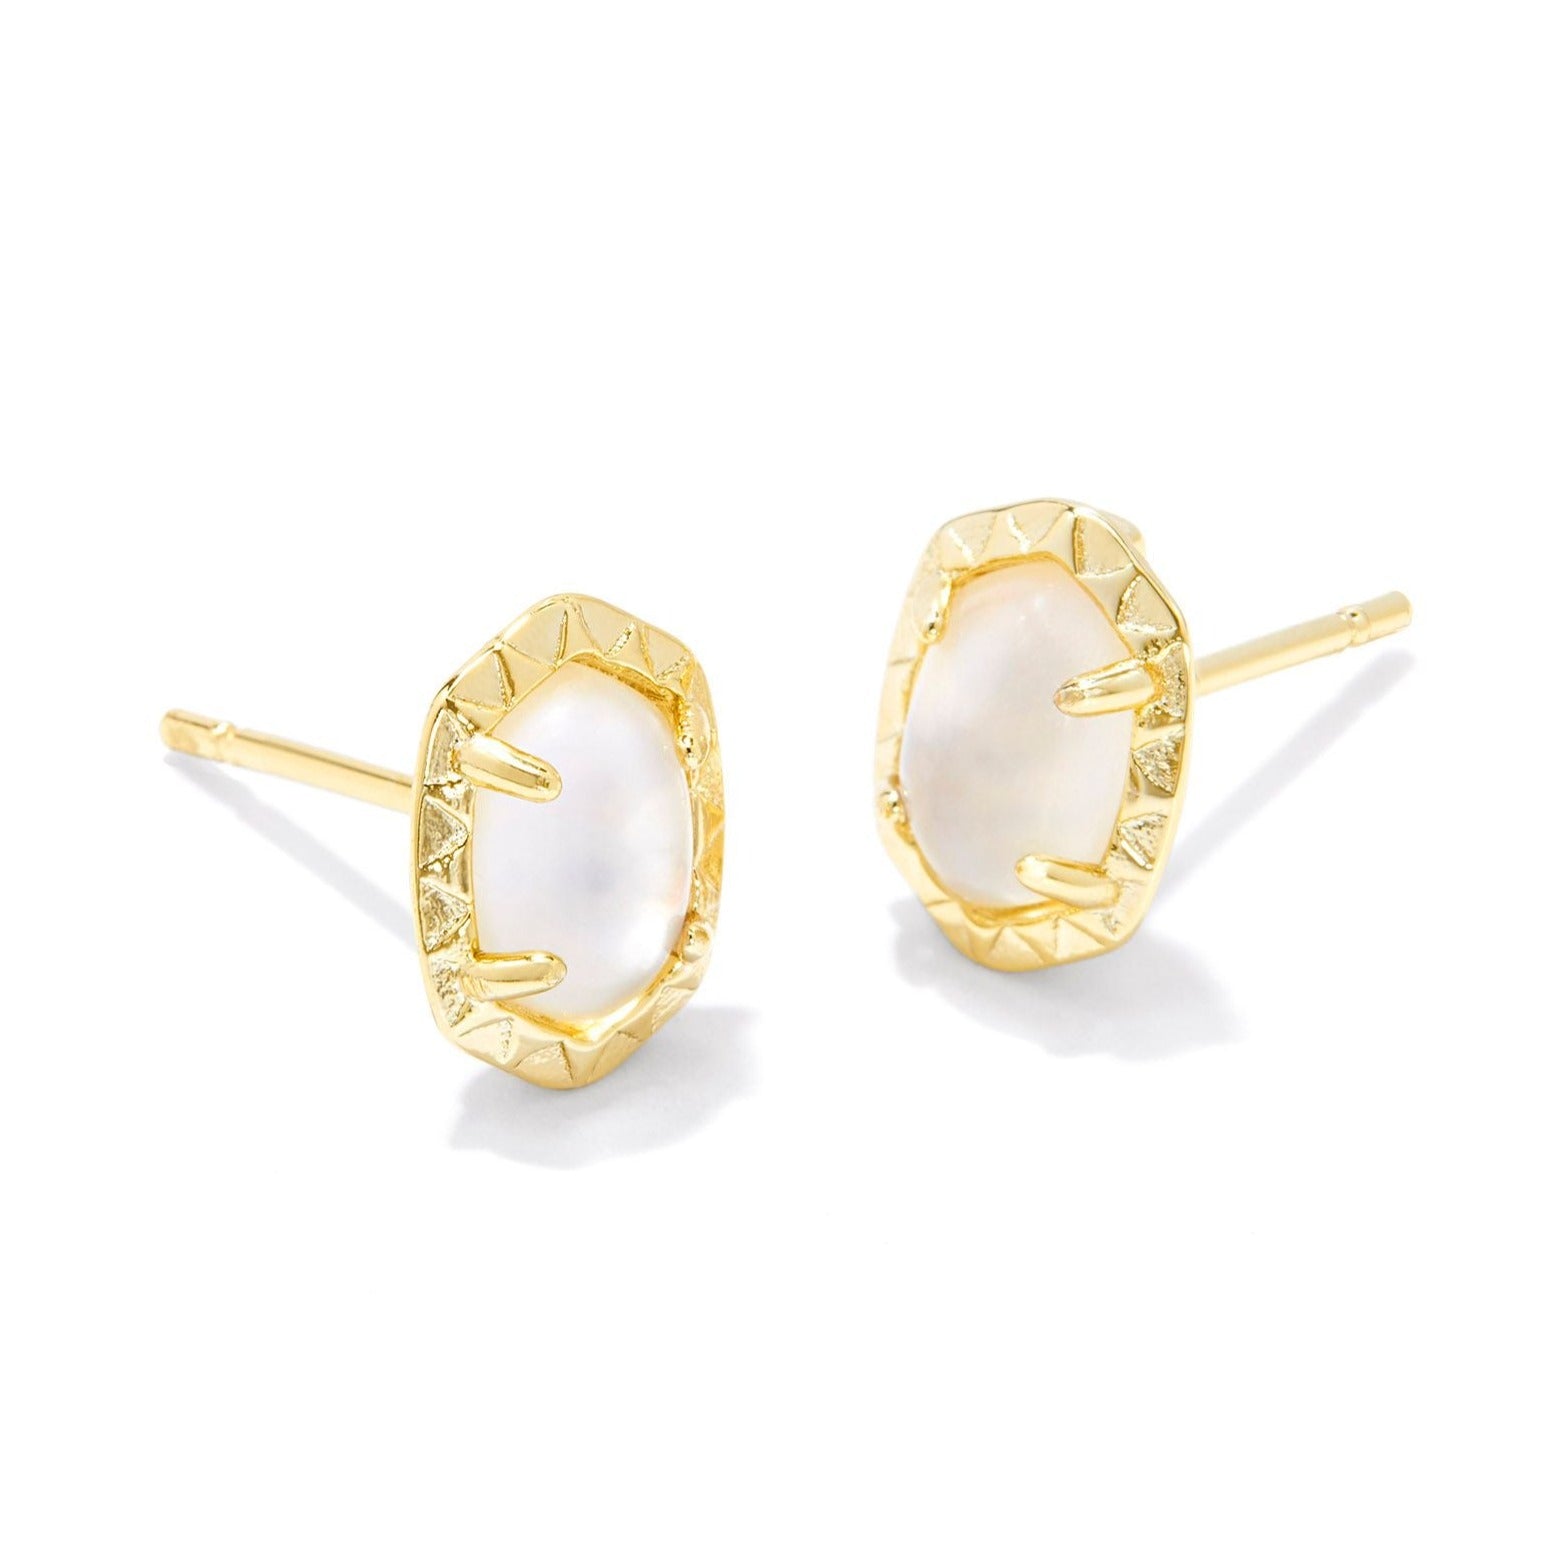 Kendra Scott | Daphne Gold Stud Earrings in Ivory Mother of Pearl - Giddy Up Glamour Boutique